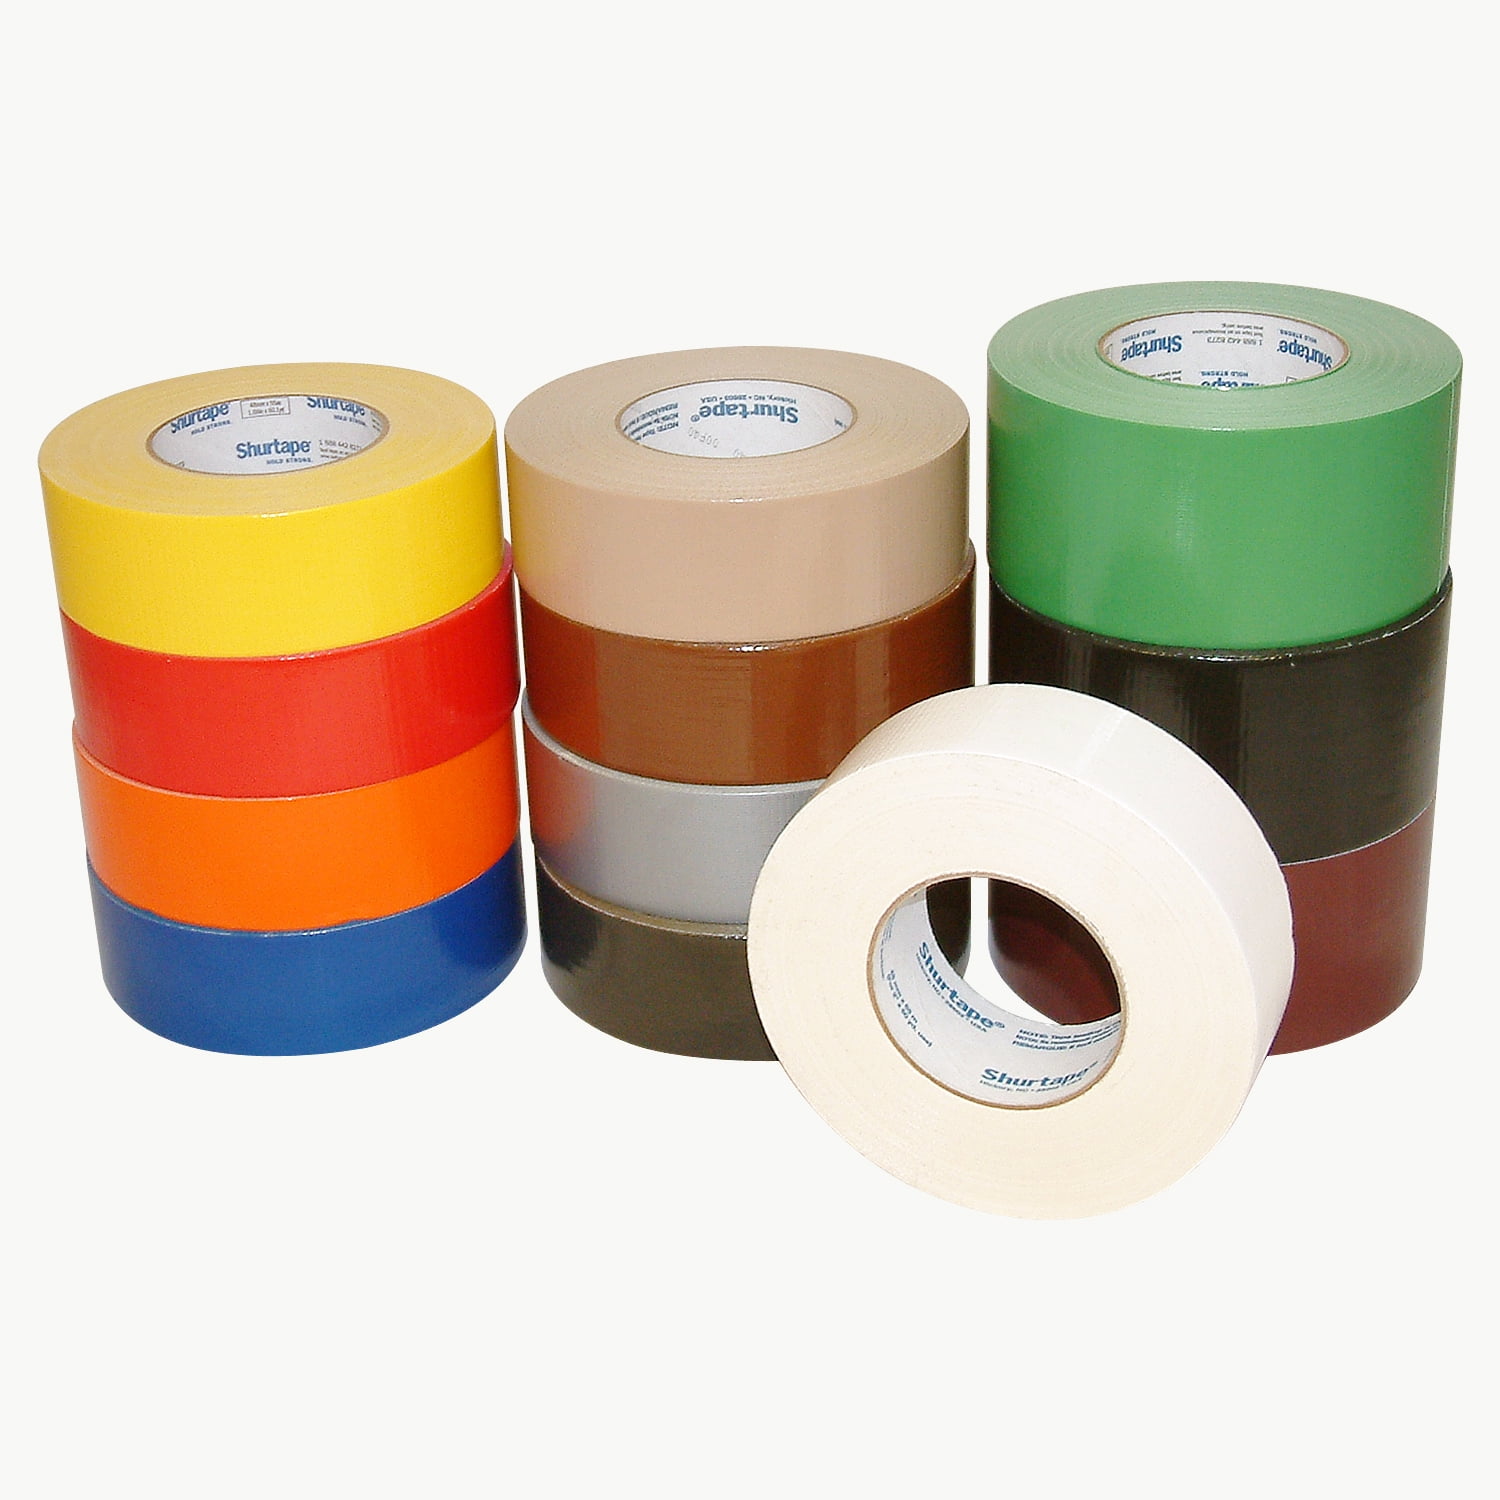 x 60 yds Tan Shurtape PC-618 Performance Grade Duct Tape 3 in 